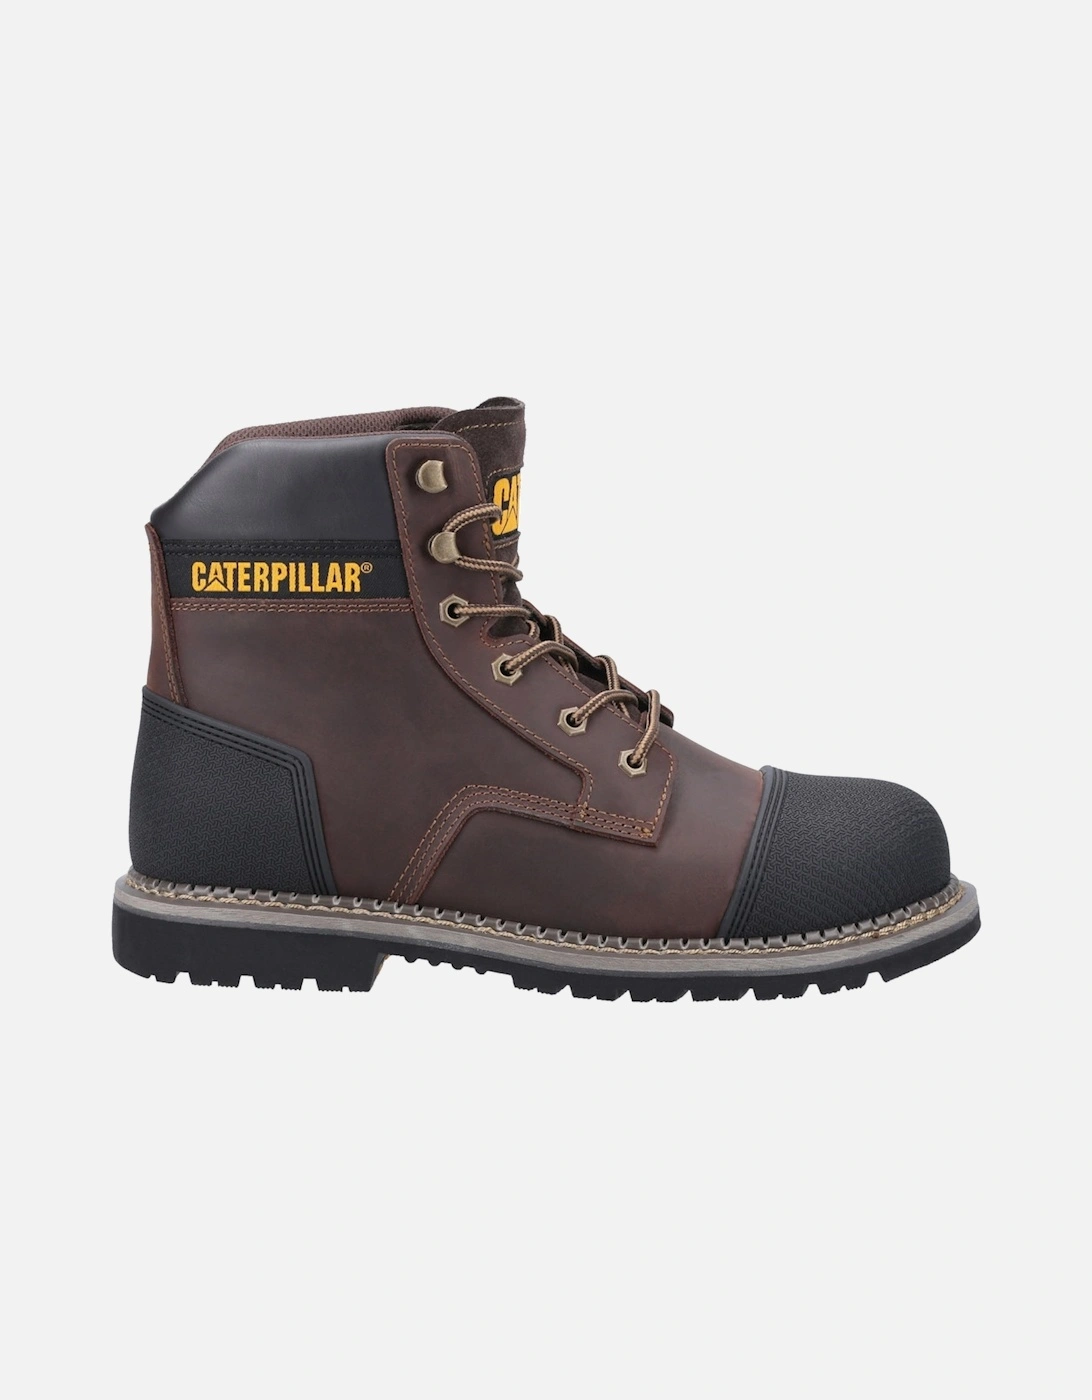 Mens Powerplant S3 Safety Boots